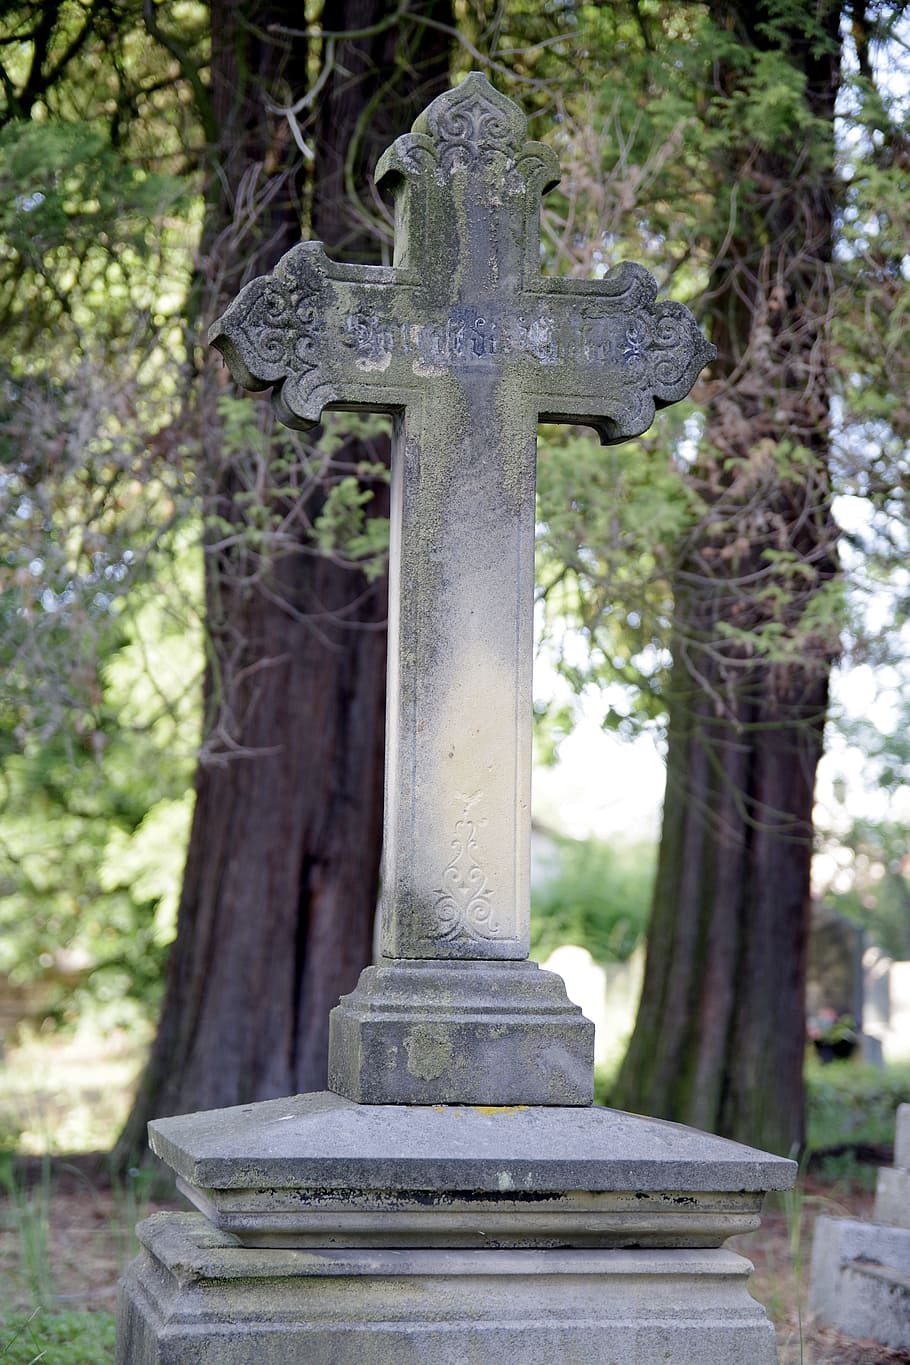 Tombstone, Cross, Cemetery, Old, Tree, shadow, stone, brick, old cemetery, death